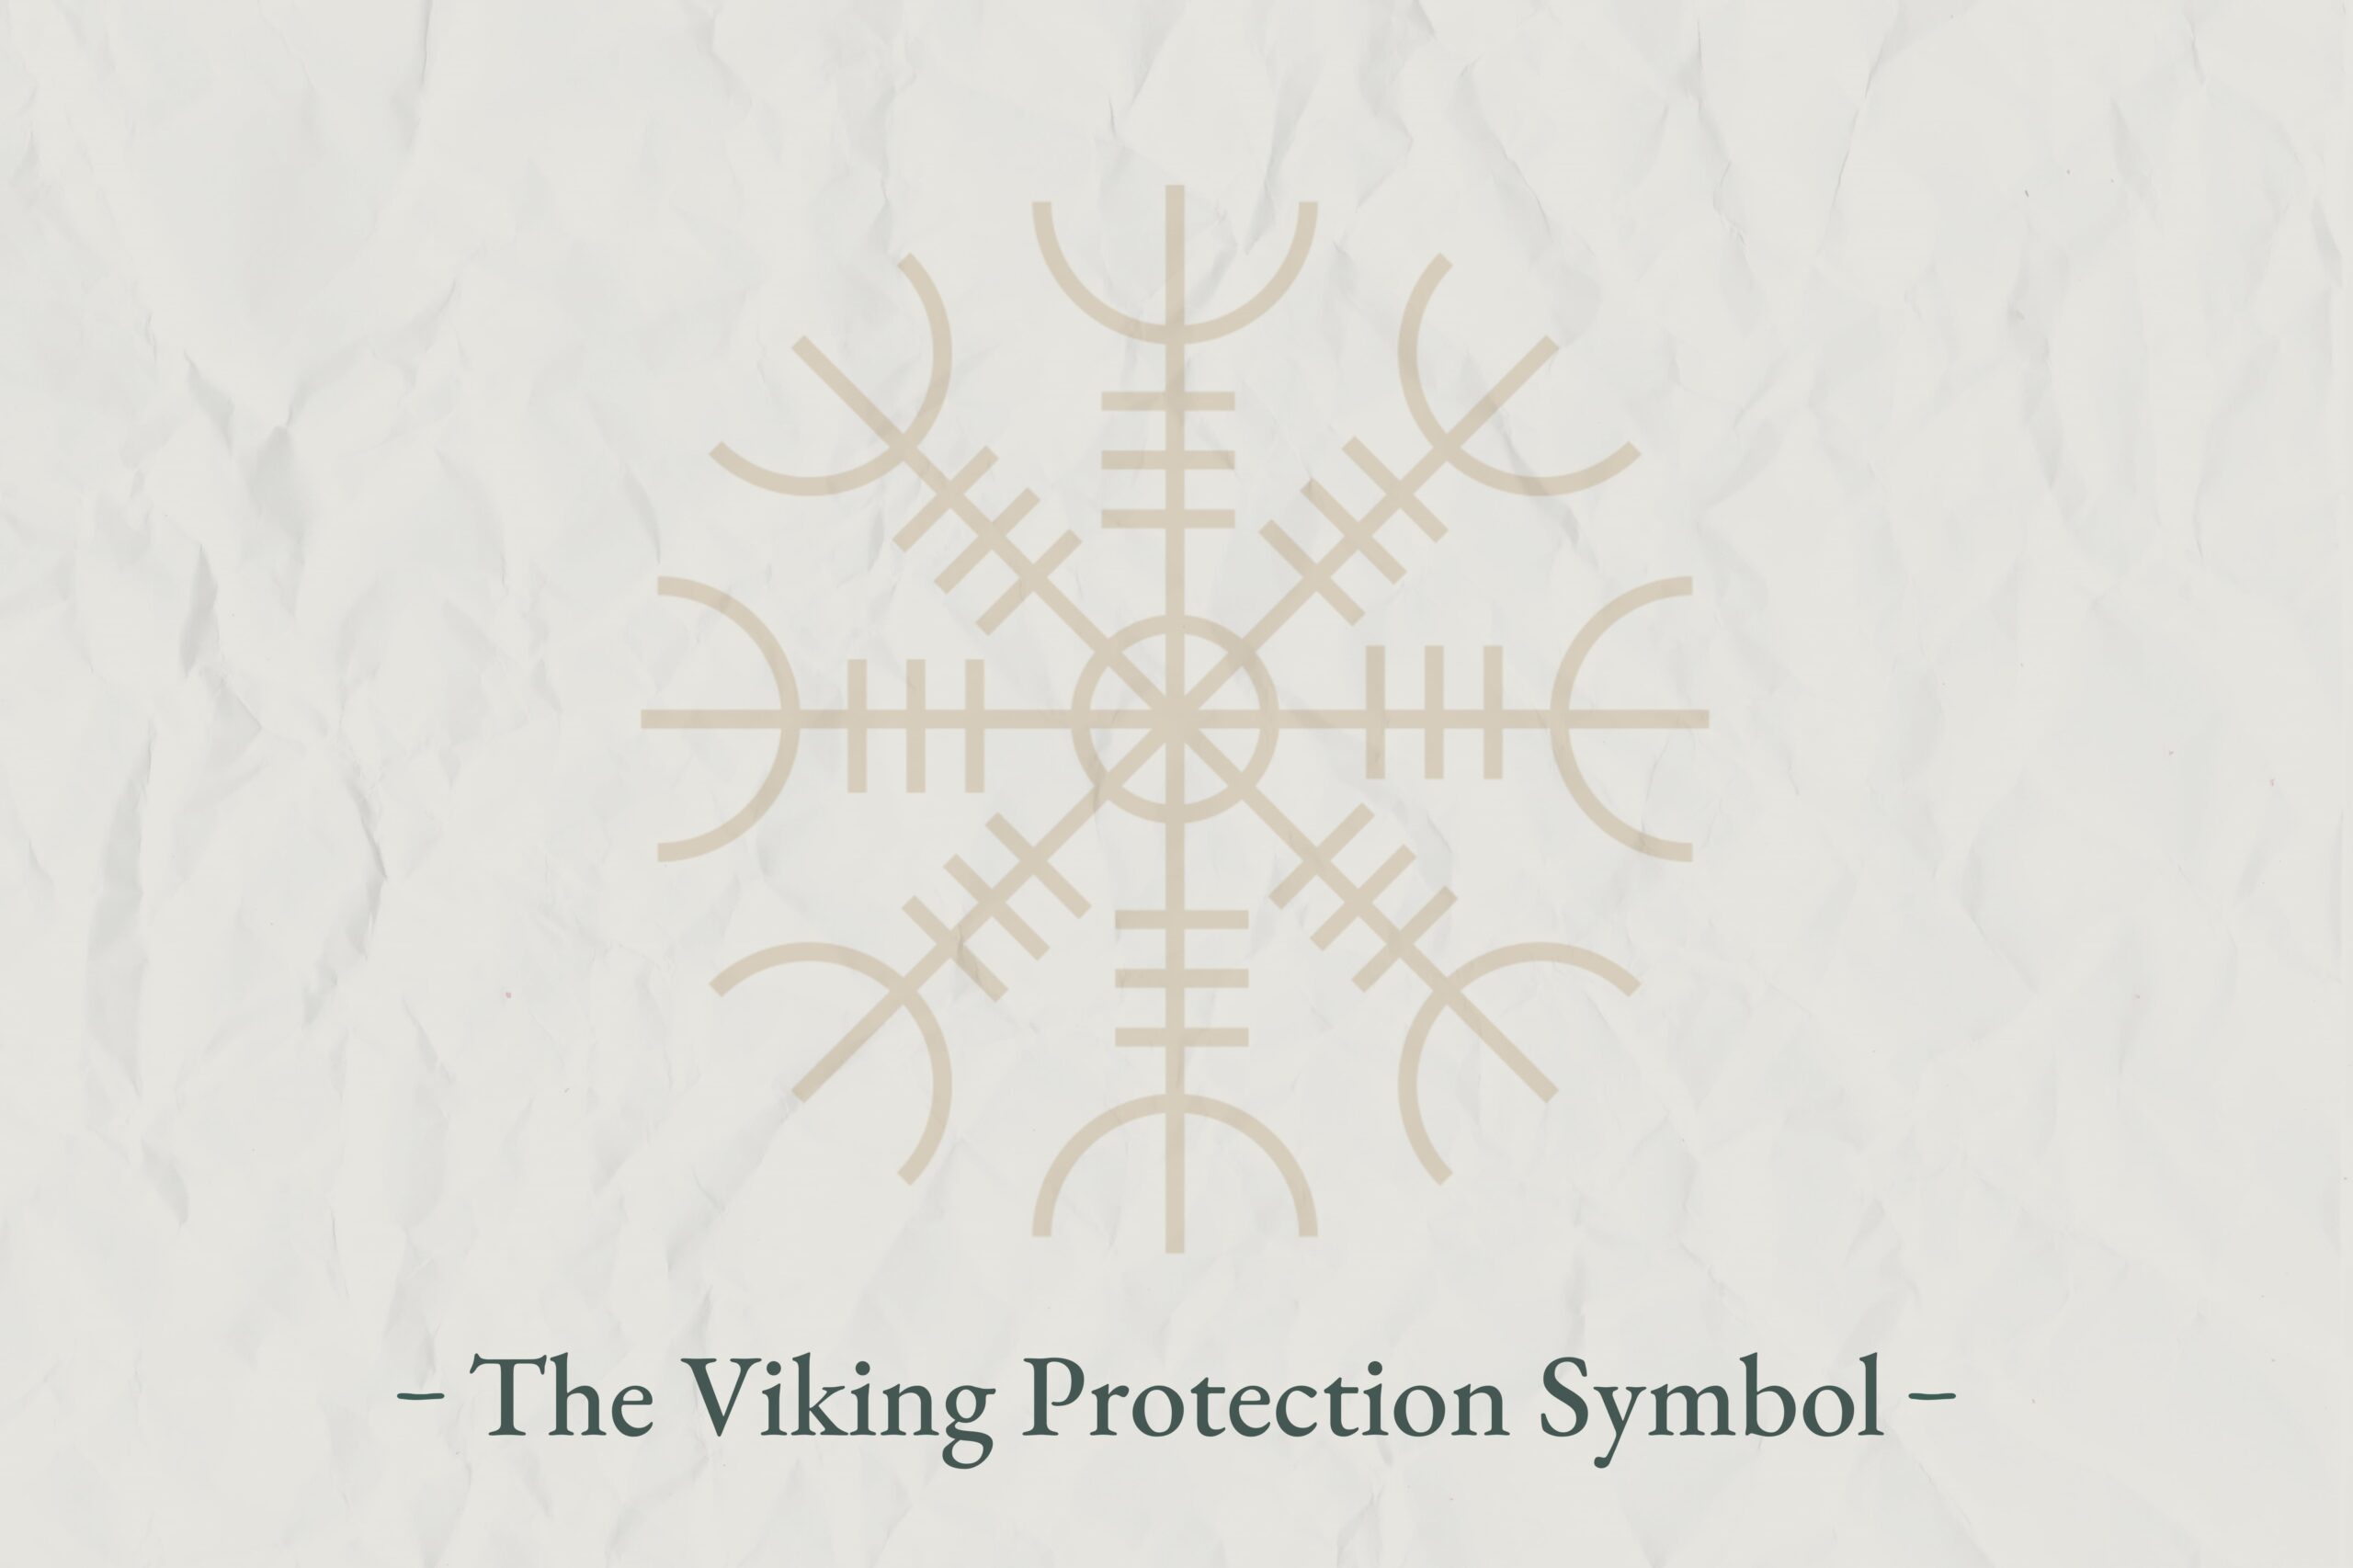 The Valkyrie symbol: what is it, and what does it mean? - Routes North